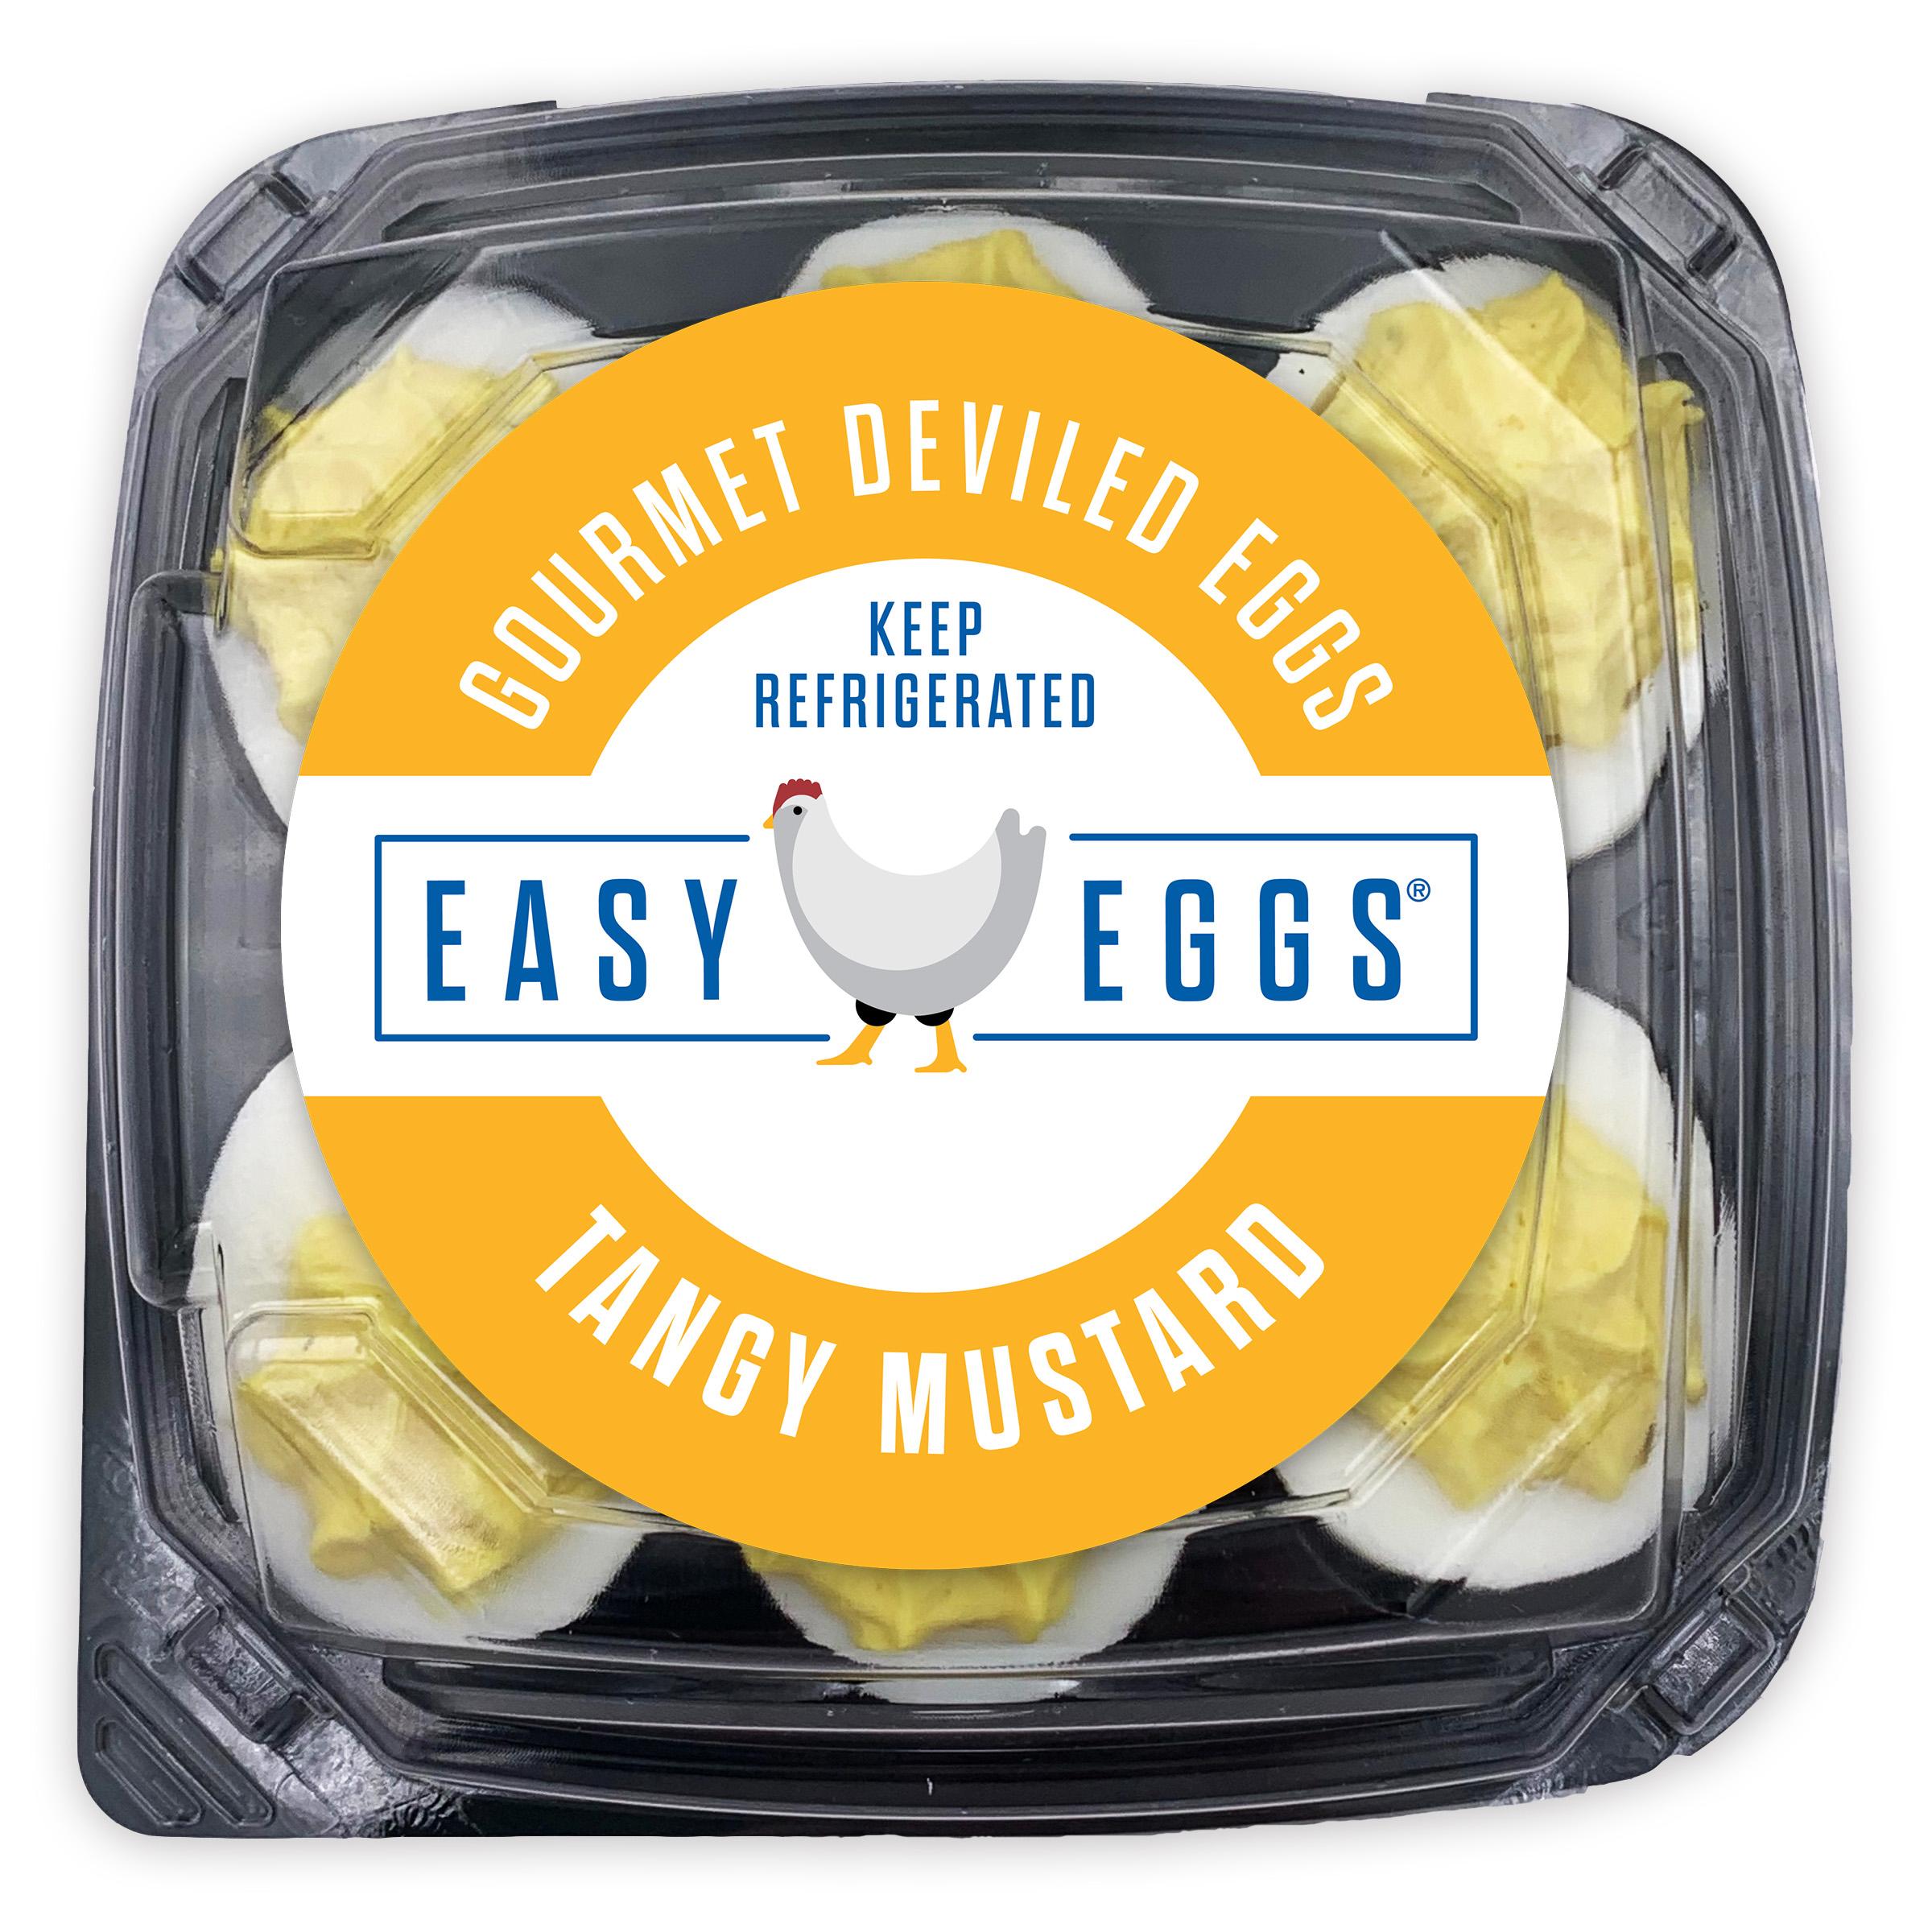 Easy Eggs® Tangy Mustard Flavor Deviled Egg Kit, 16/6 Count Trays